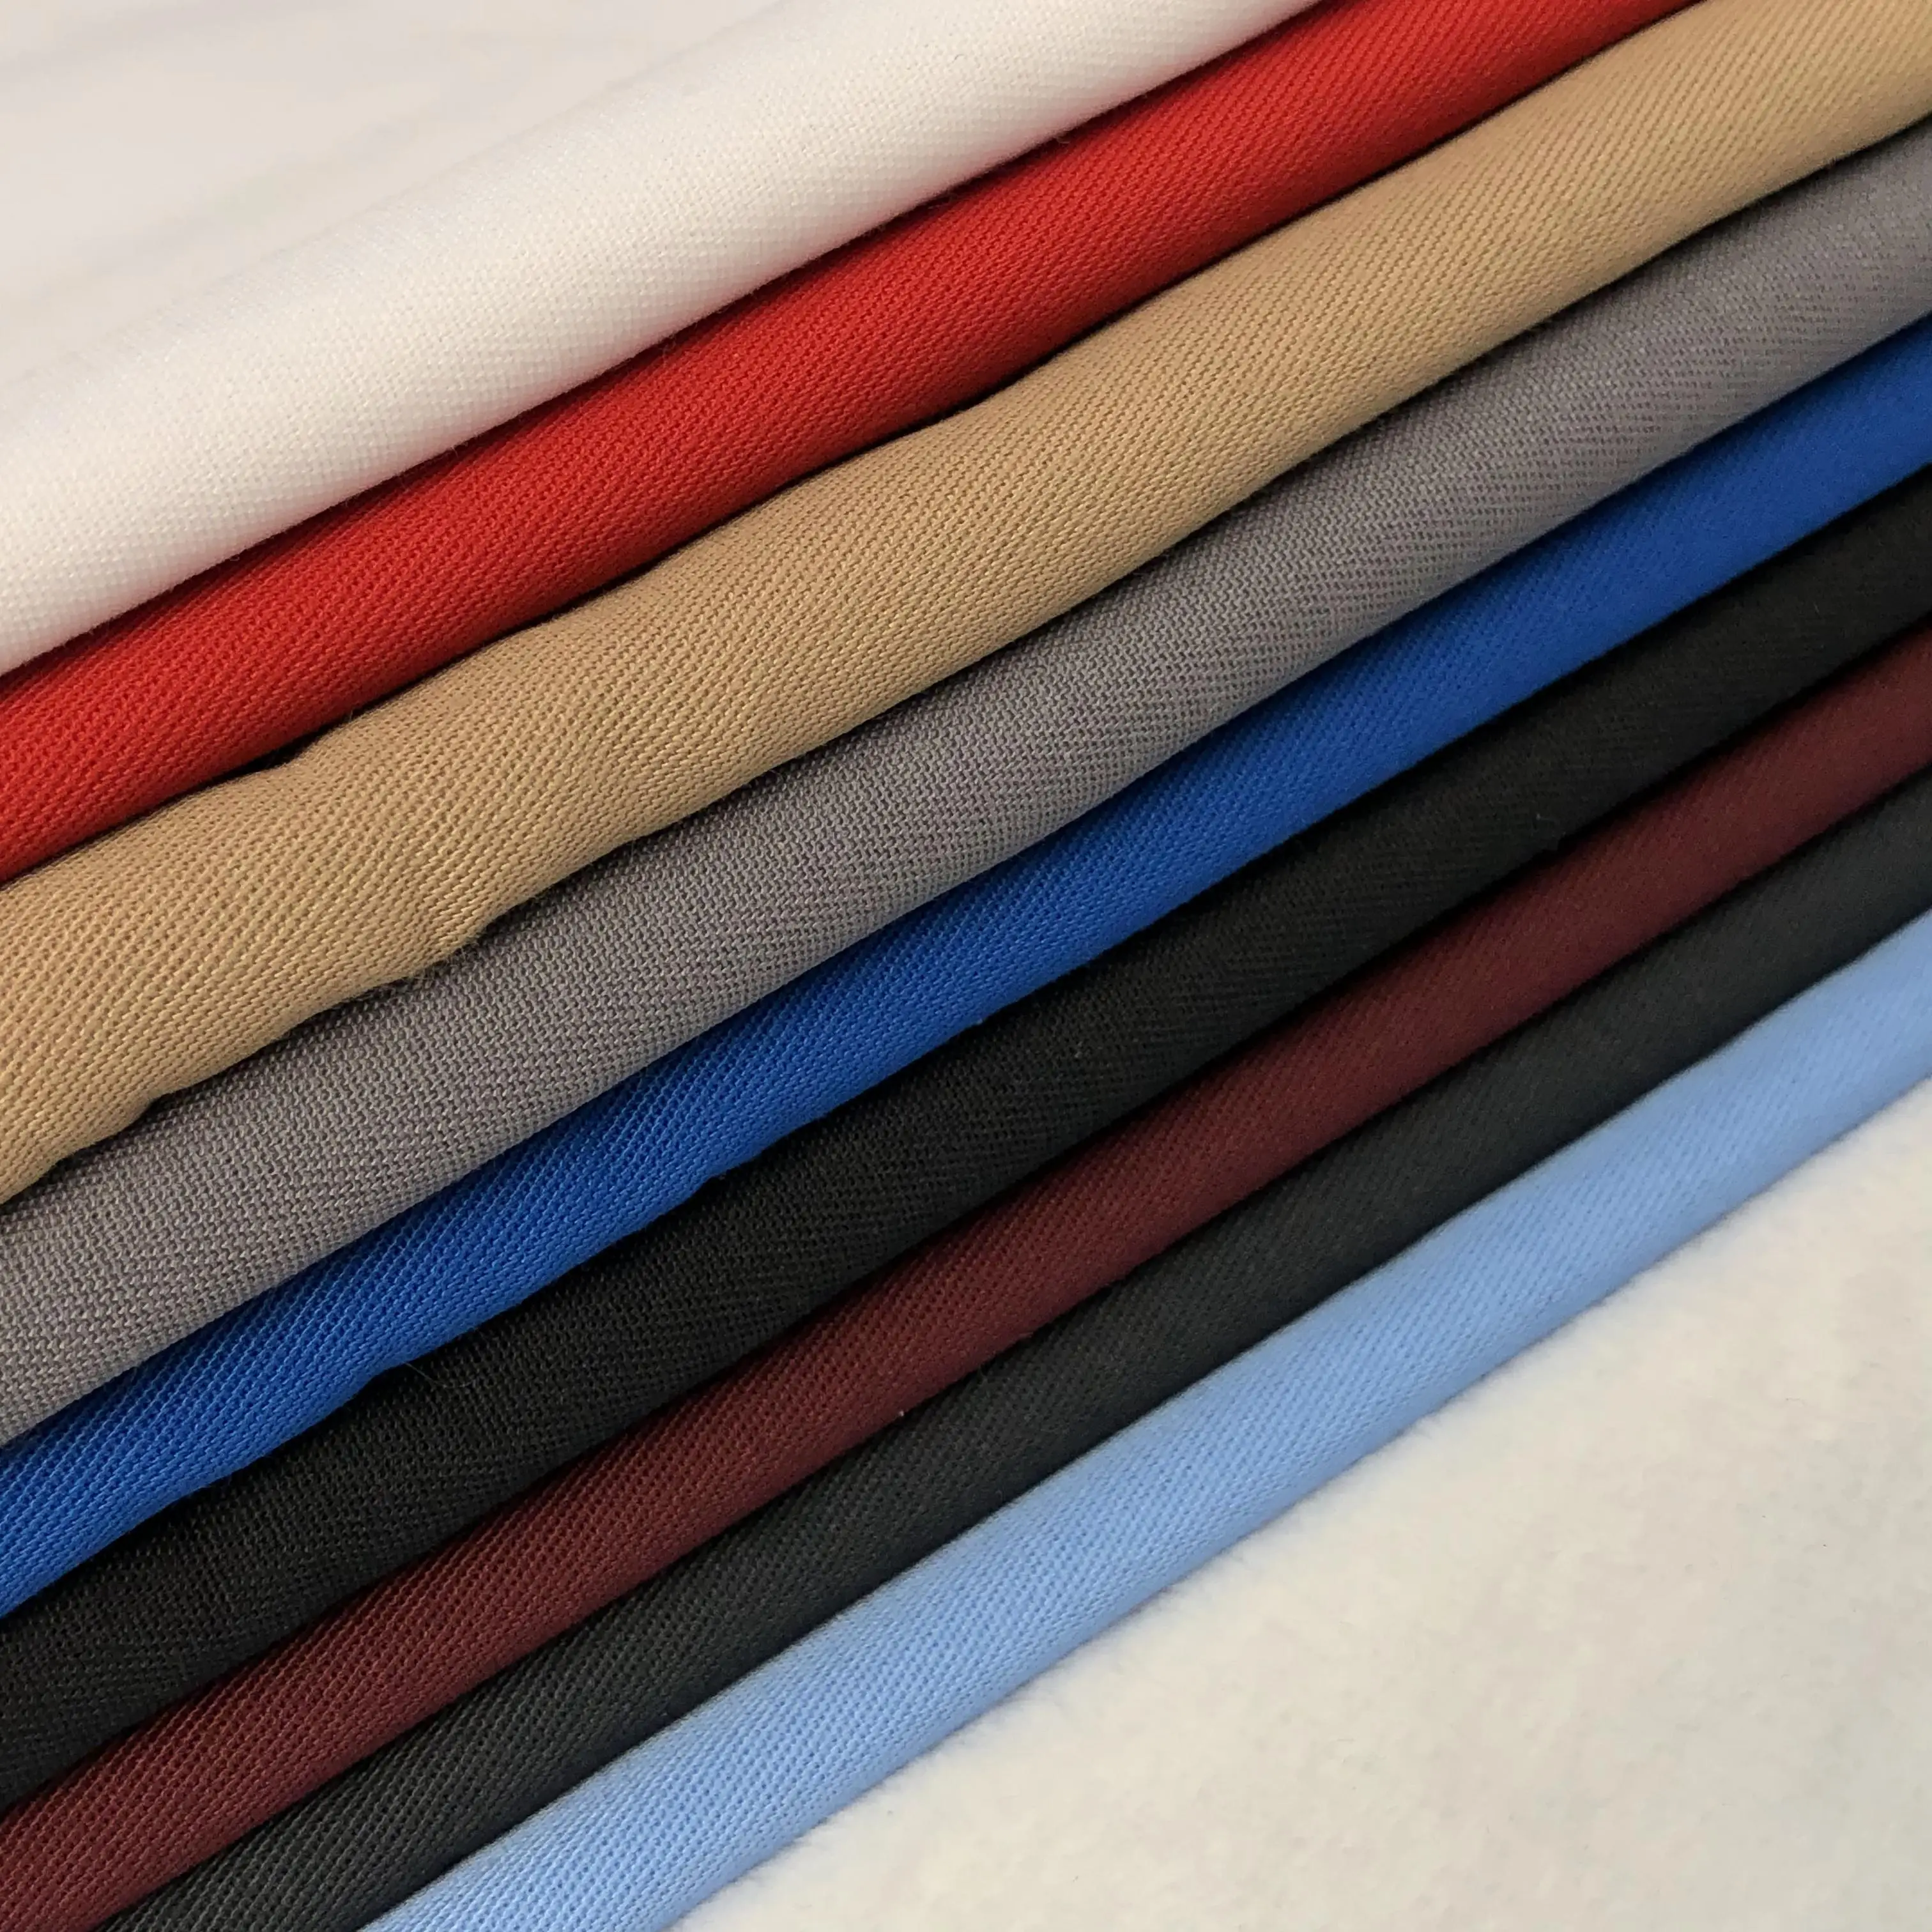 Polyester/cotton TC Twill 65 polyester 35 cotton fabric for medical uniforms